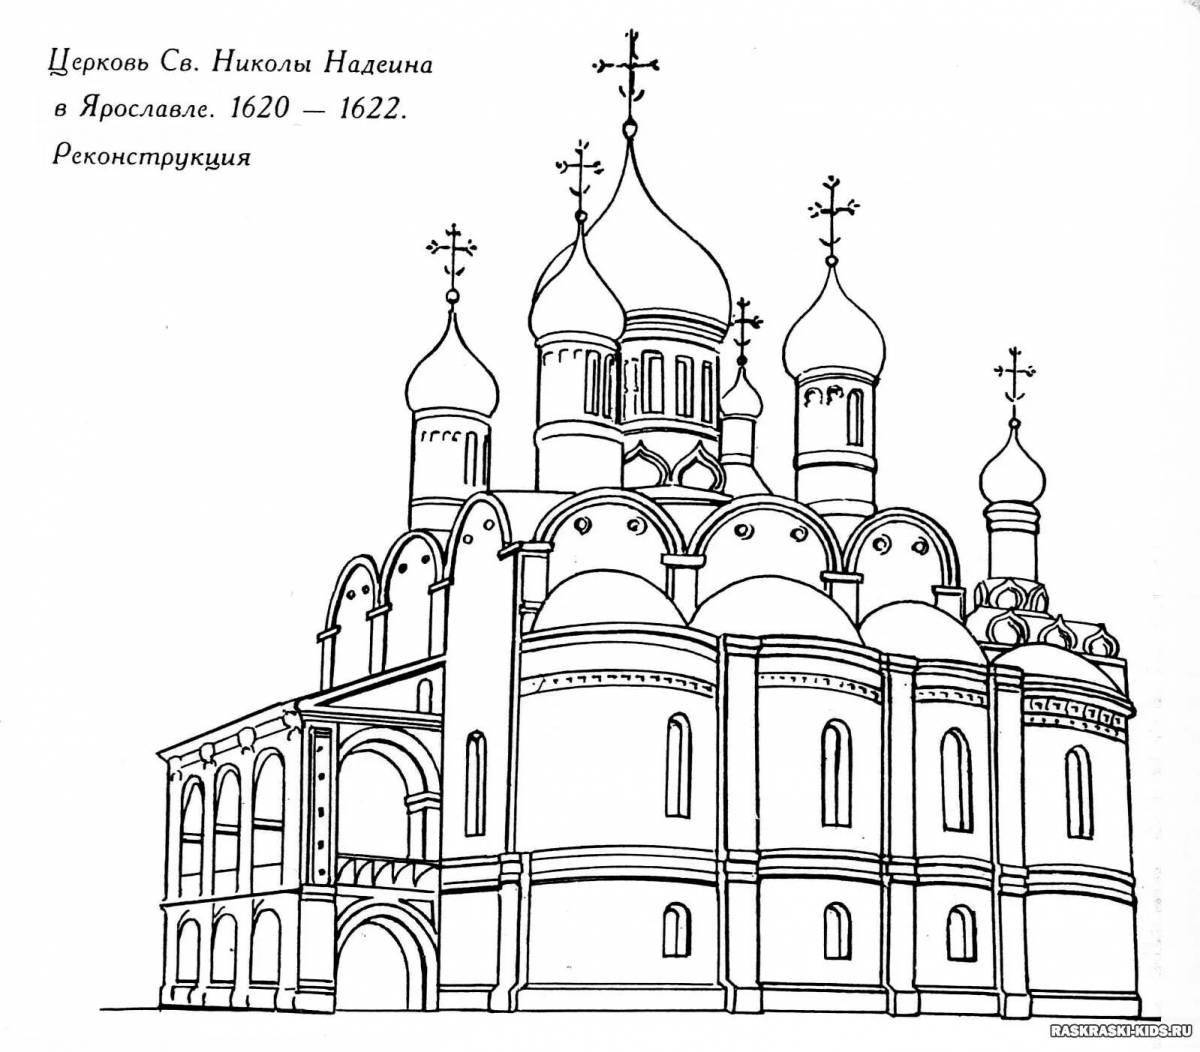 Charming coloring of the city of vladimir